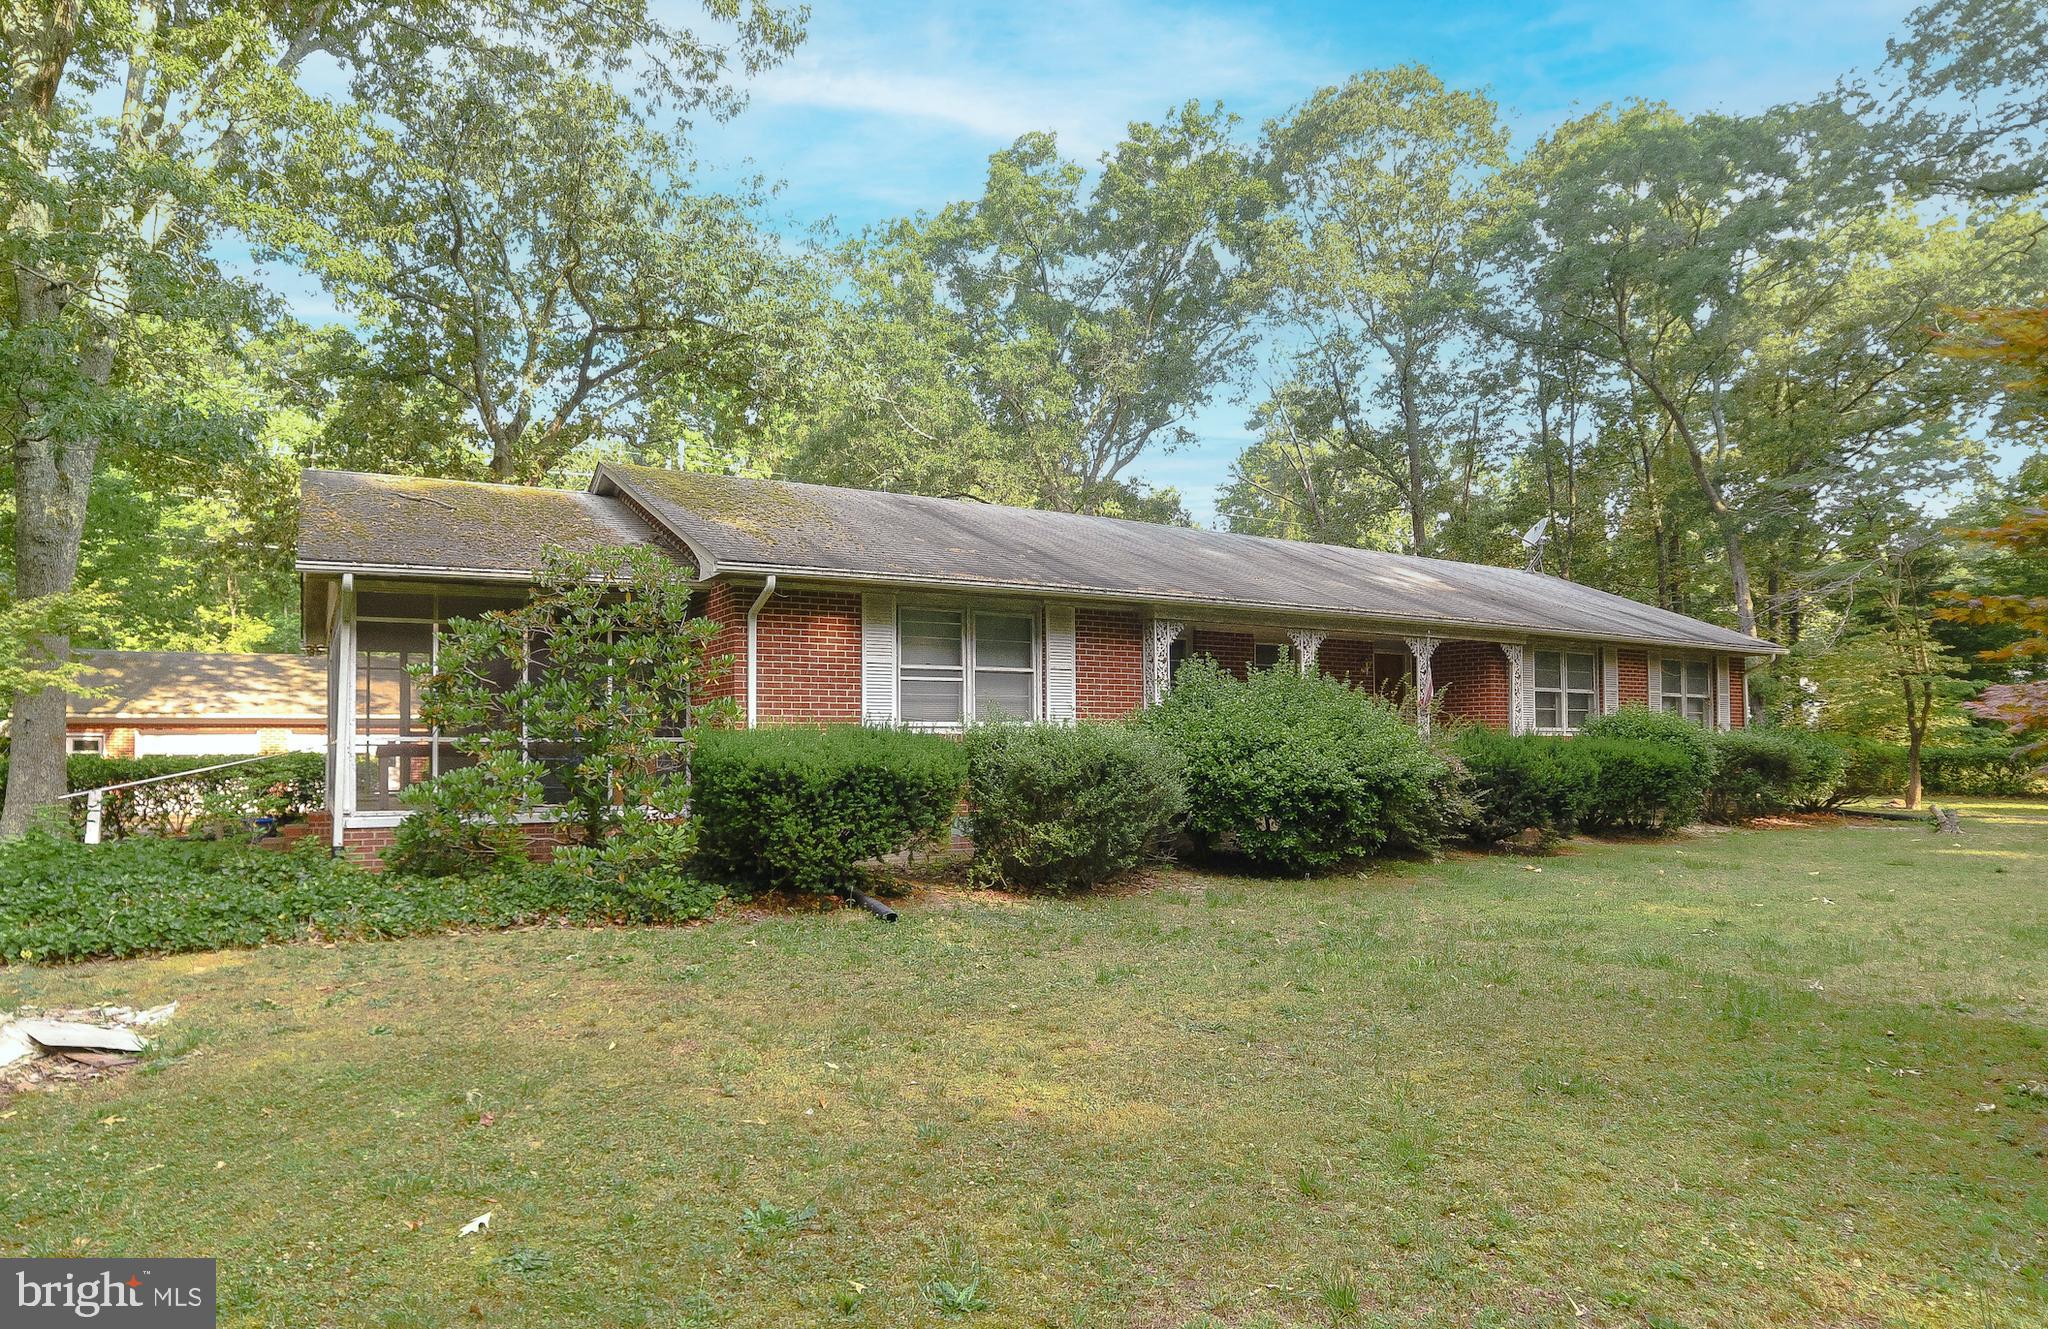 Huge price reduction!  One level living with this Remodeled brick rambler.  3 Bedrooms, 2 full Baths